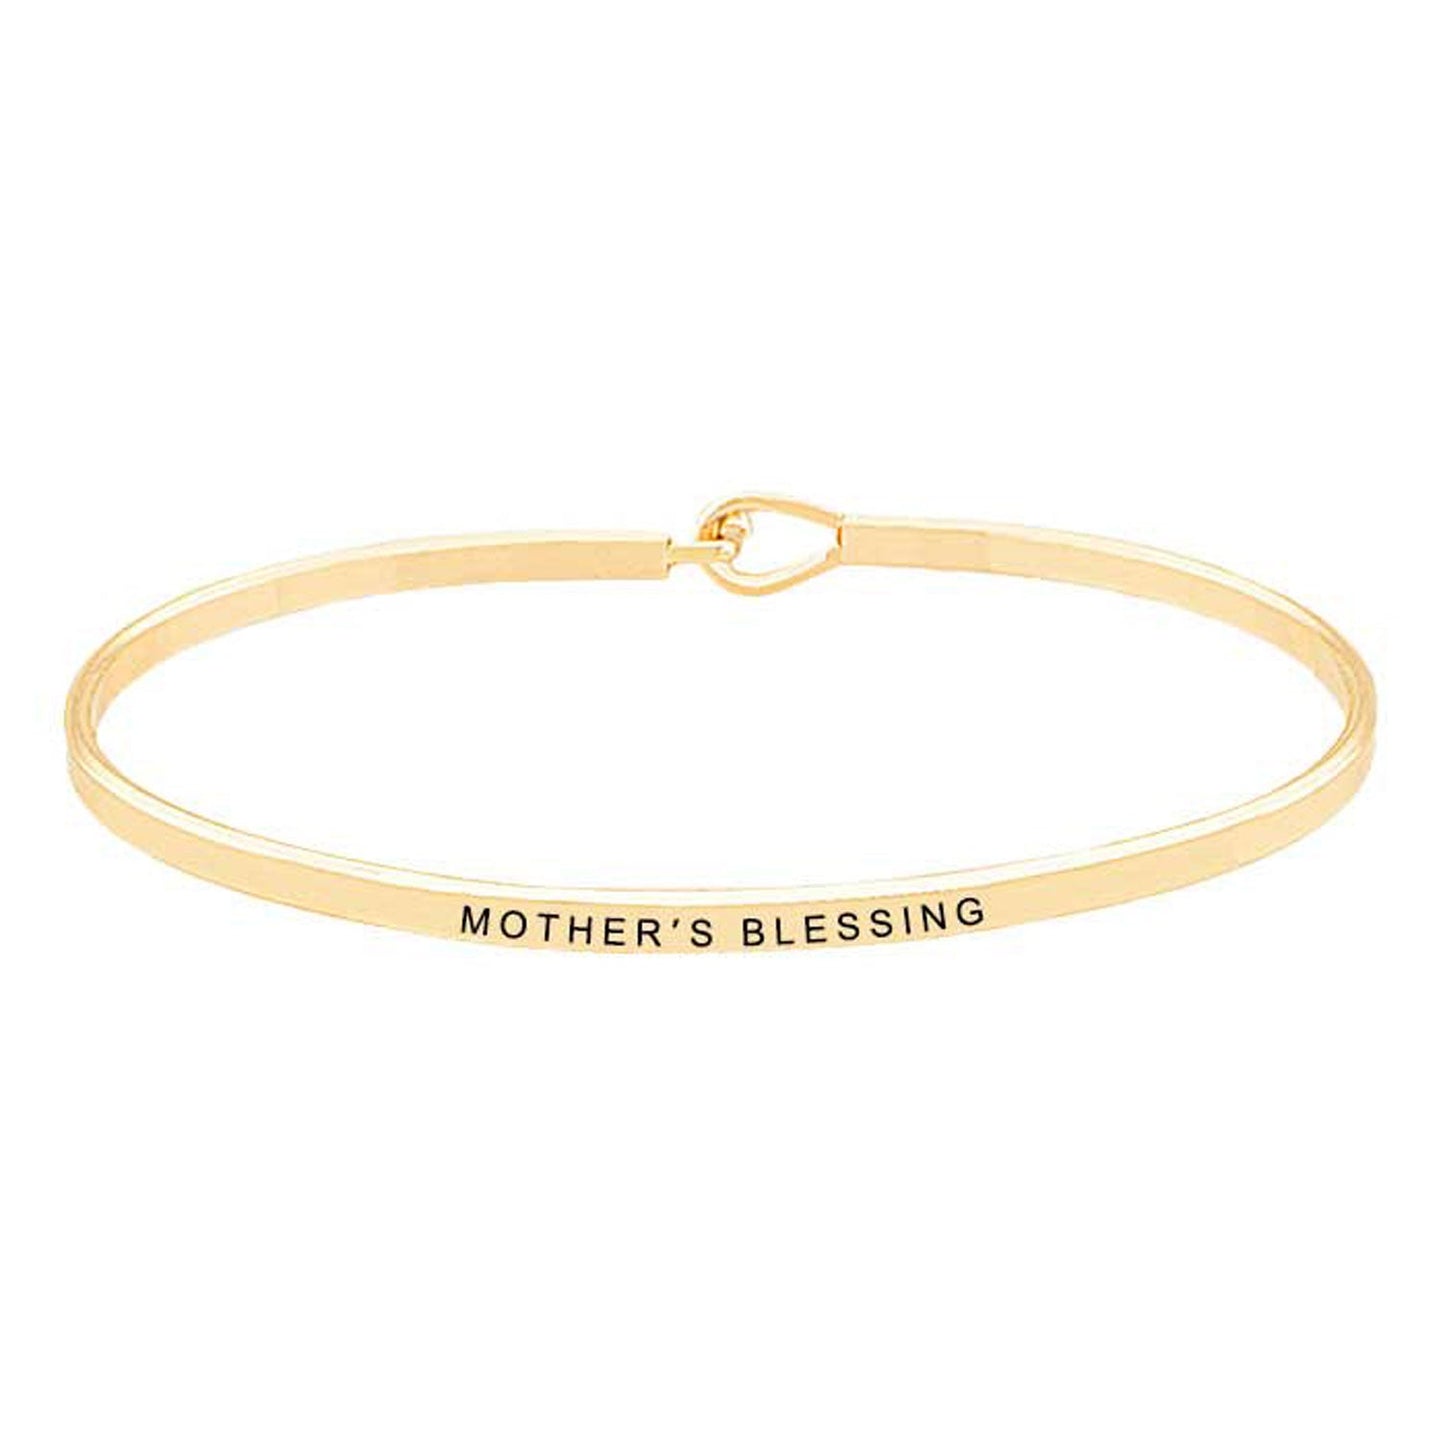 Gold Mother's Blessing Brass Thin Metal Hook Bracelet, These metal circle hook bracelets are easy to put on, take off and so comfortable for daily wear. Pair with a tee and jeans to dress up your laid-back look, or add to a shift dress and pumps to enhance your work-ready ensemble. Makes a great gift for any occasion.